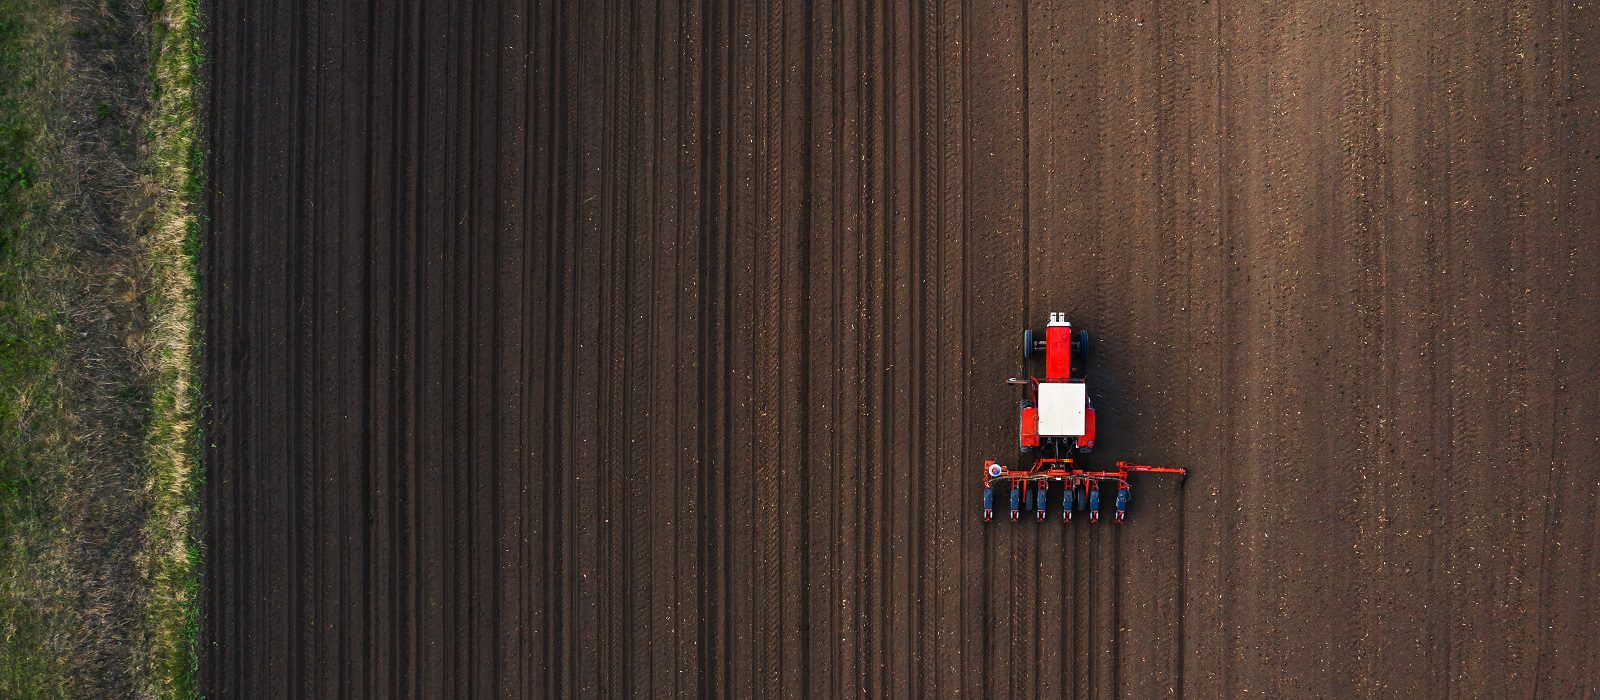 Top view of tractor planting corn seed in field, high angle view drone photography